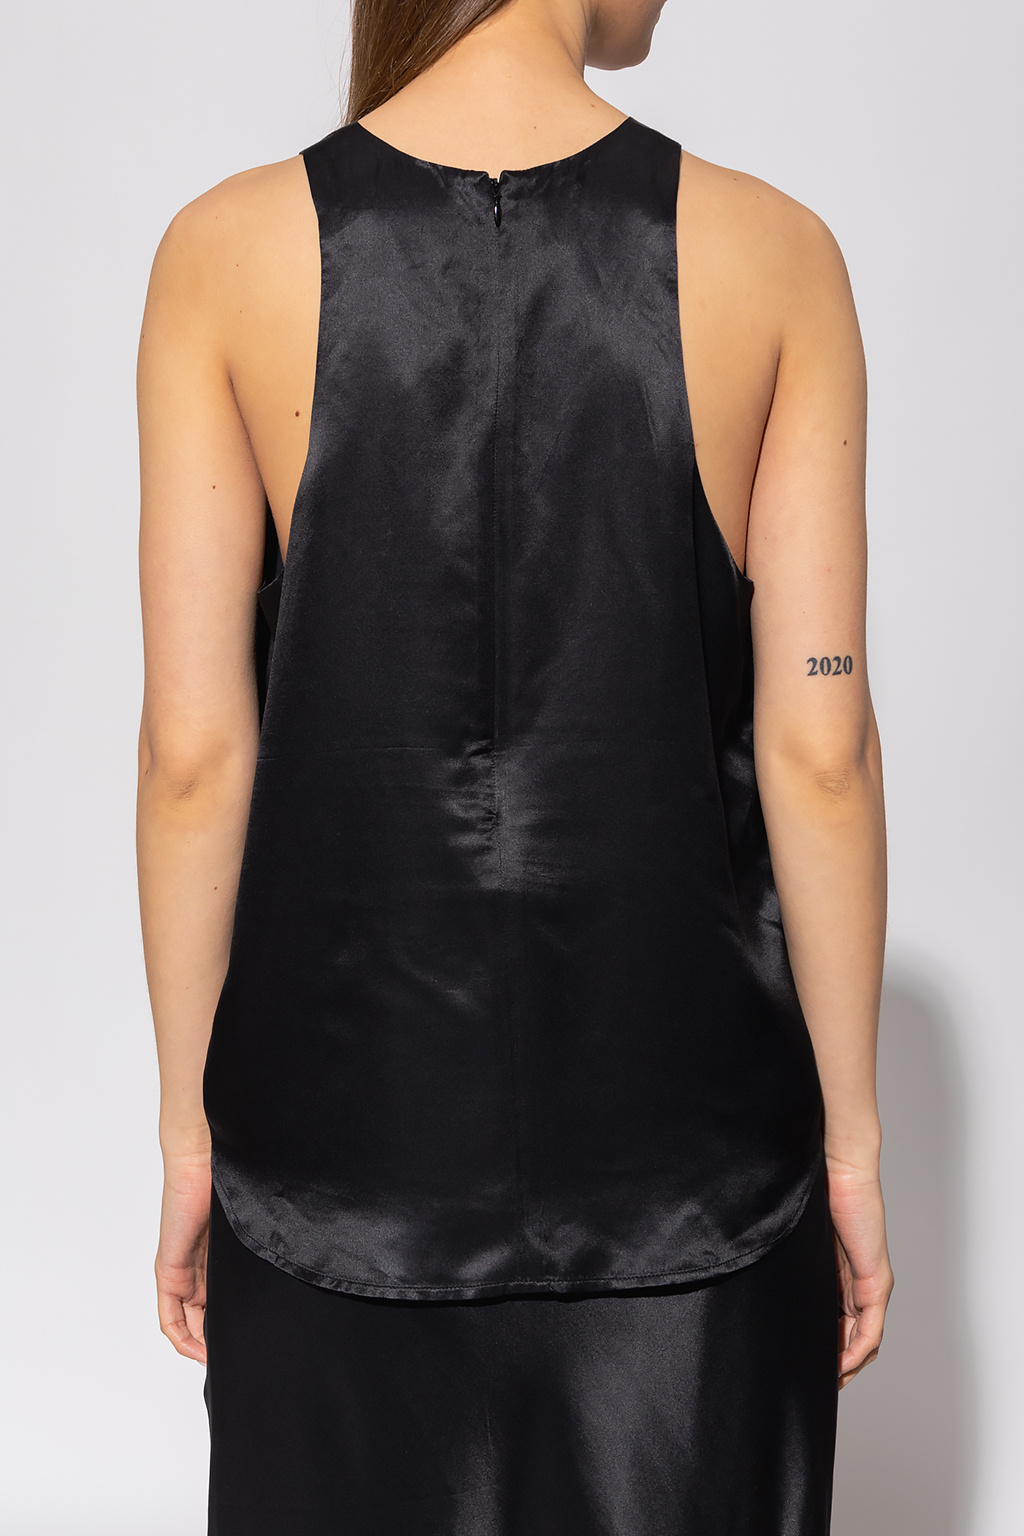 HERSKIND ‘Dixie’ tank top